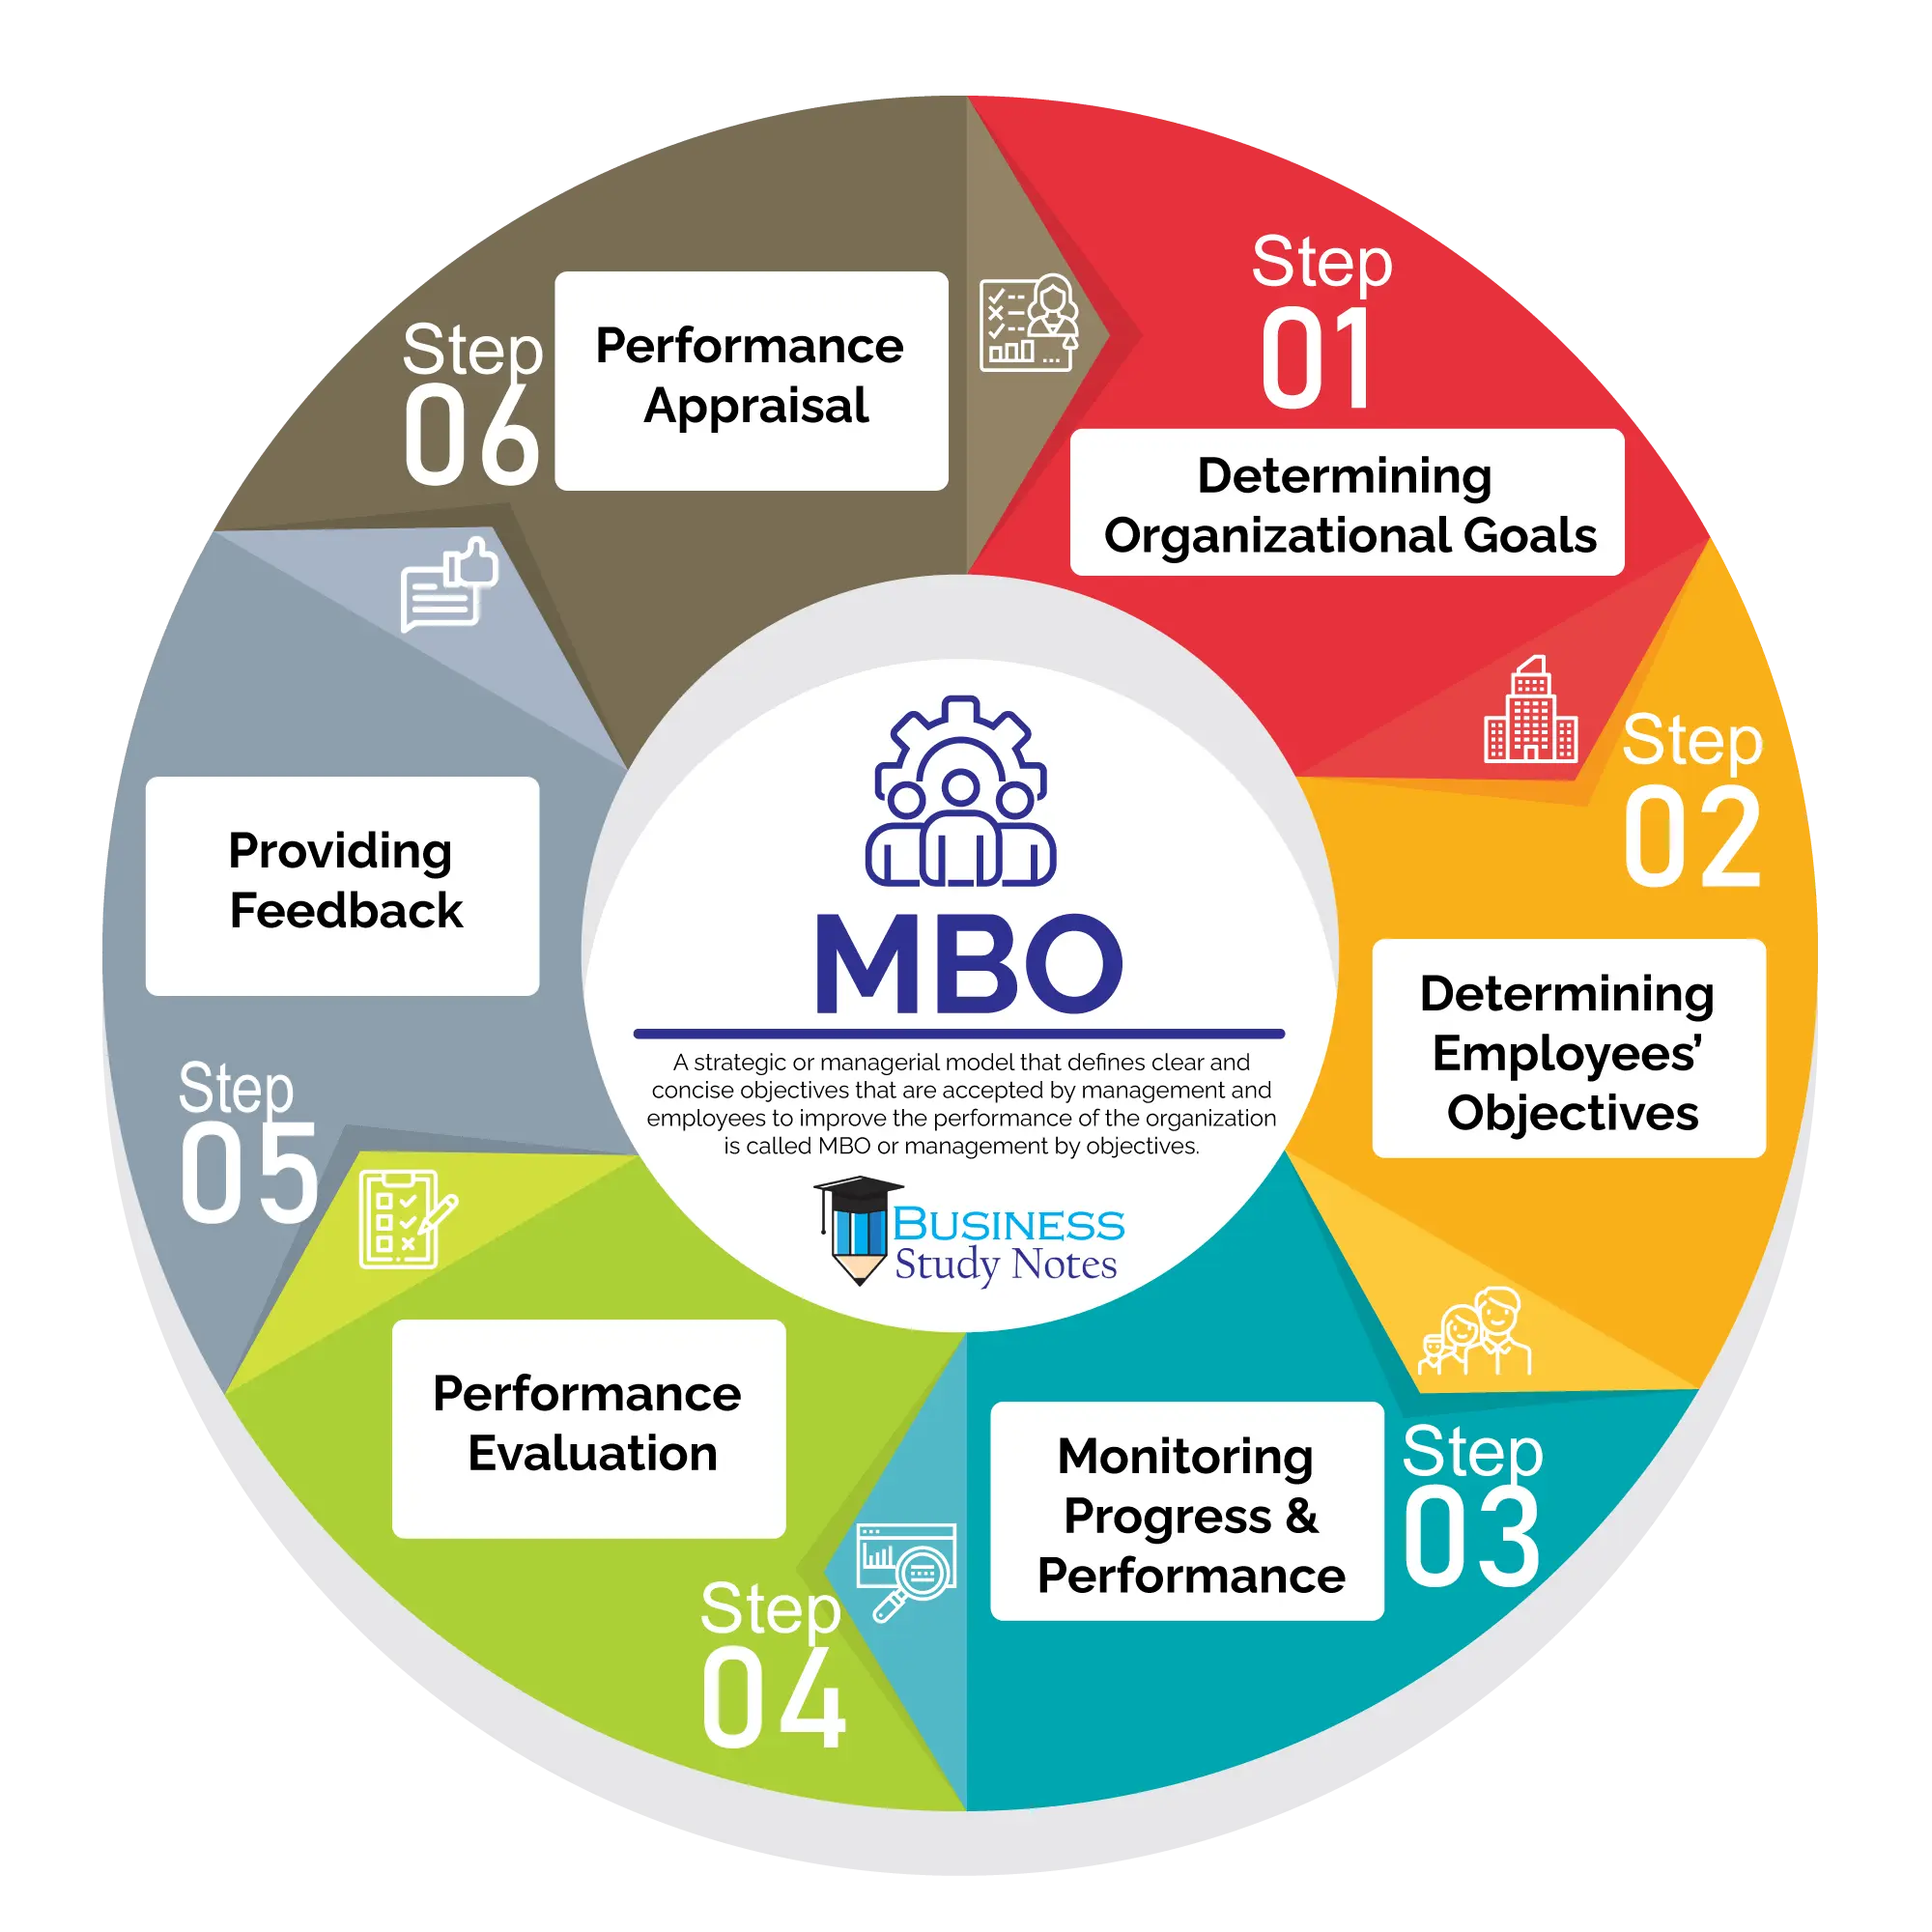 hewlett packard mbo - What does MBO stand for